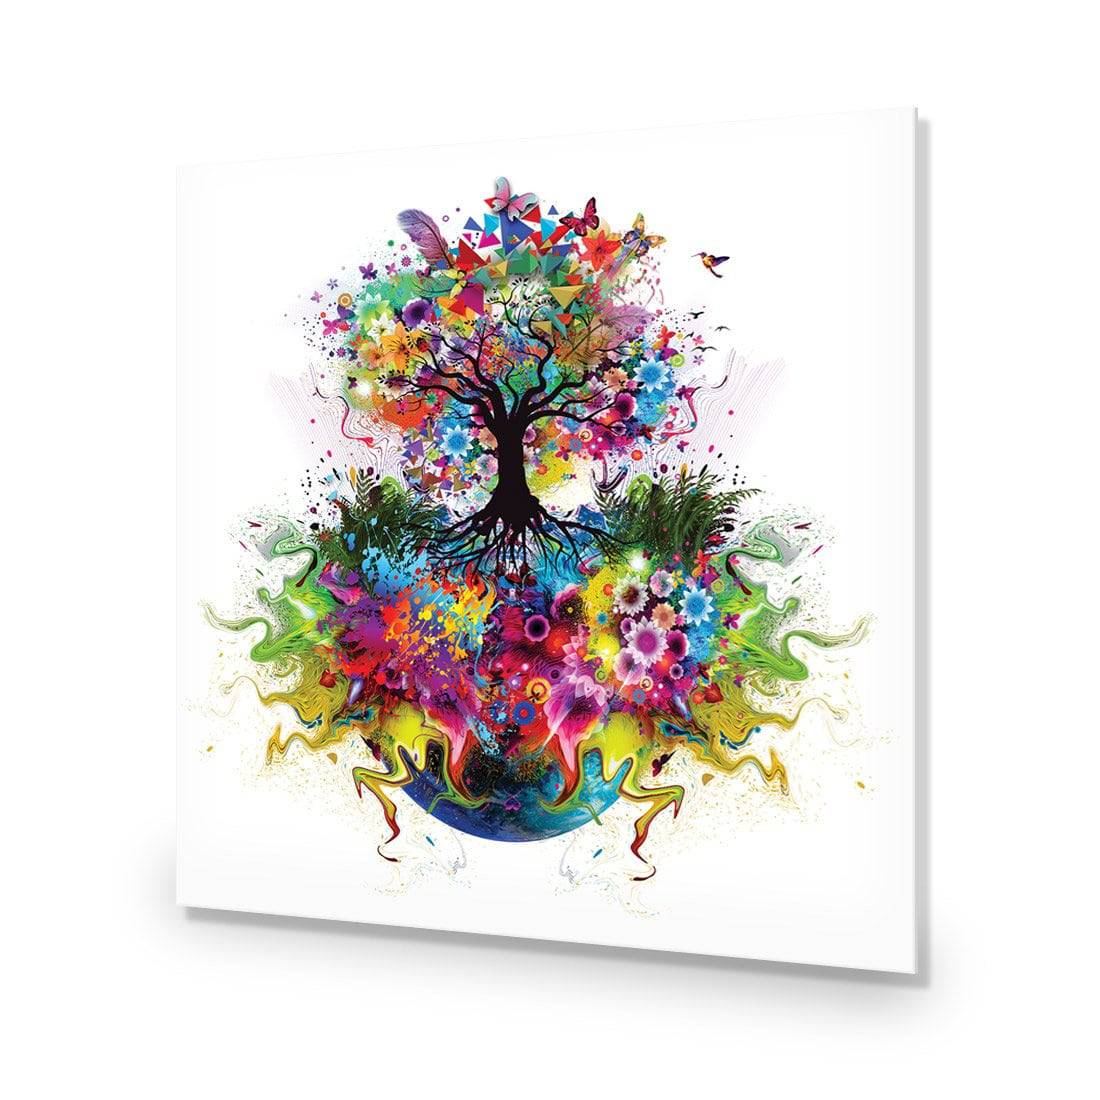 Flower Power, Square-Acrylic-Wall Art Design-Without Border-Acrylic - No Frame-37x37cm-Wall Art Designs